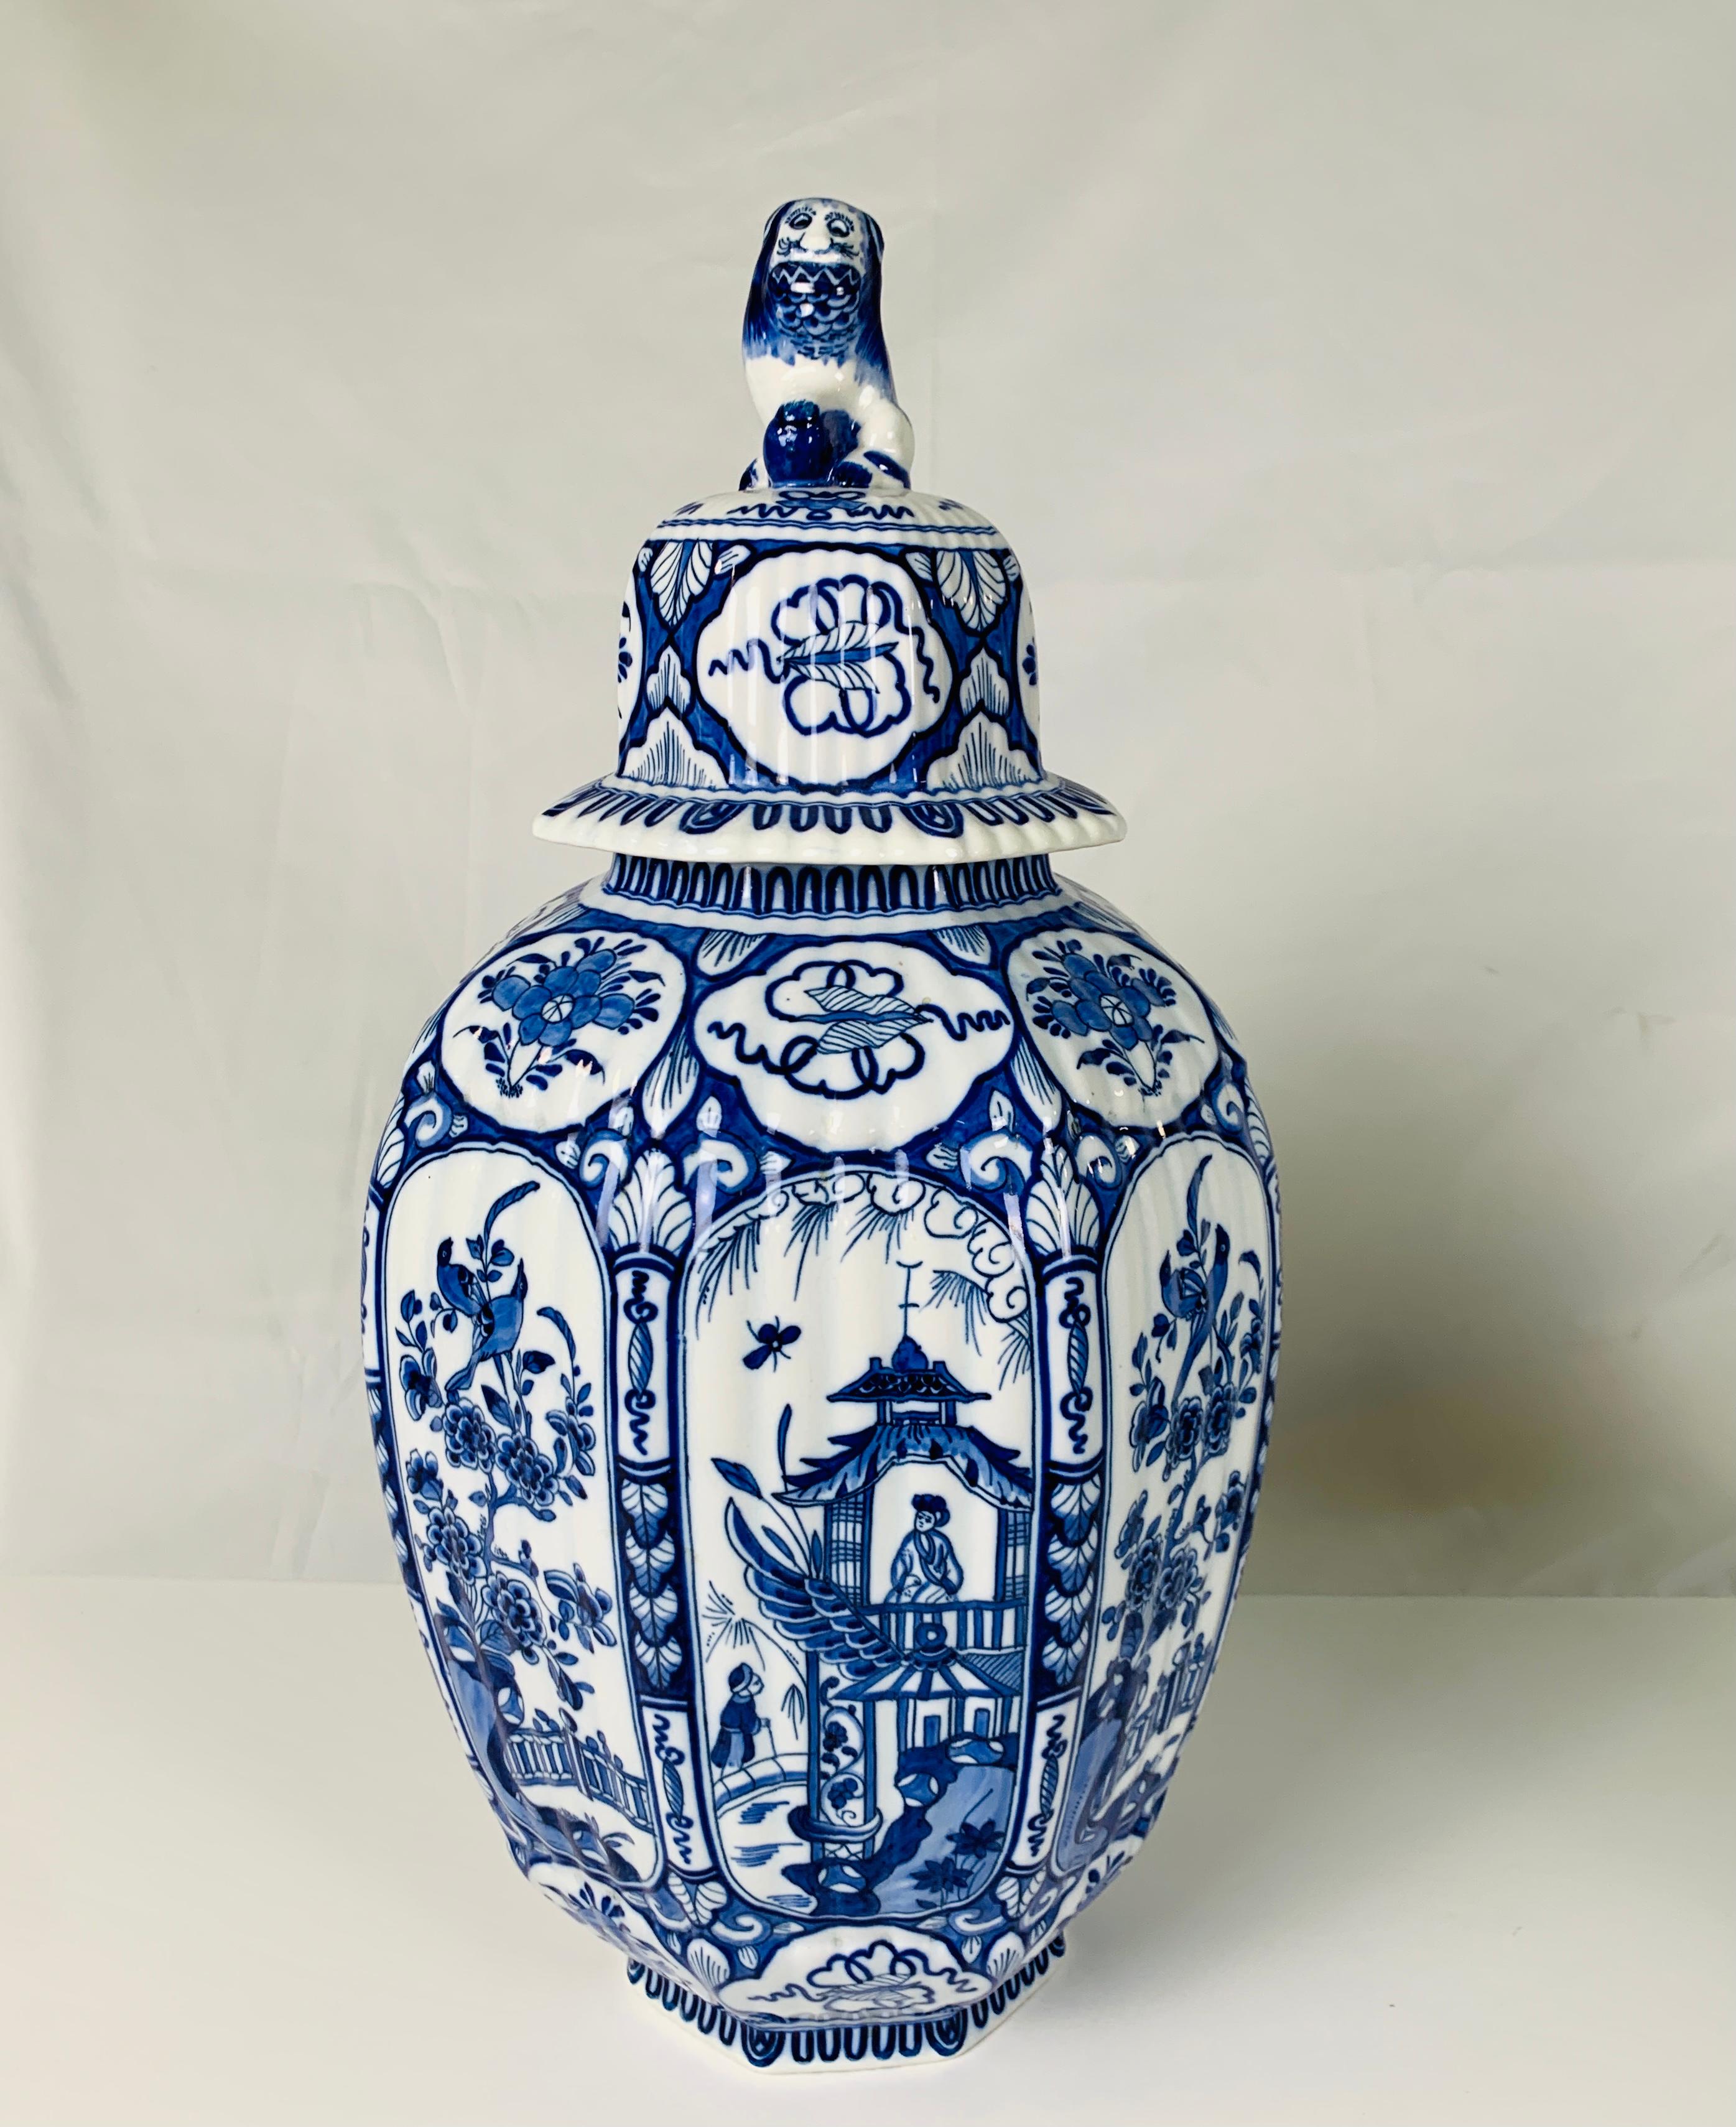 Rococo Group of Large Dutch Delft Jars and Vases 18th-19th and 20th Centuries